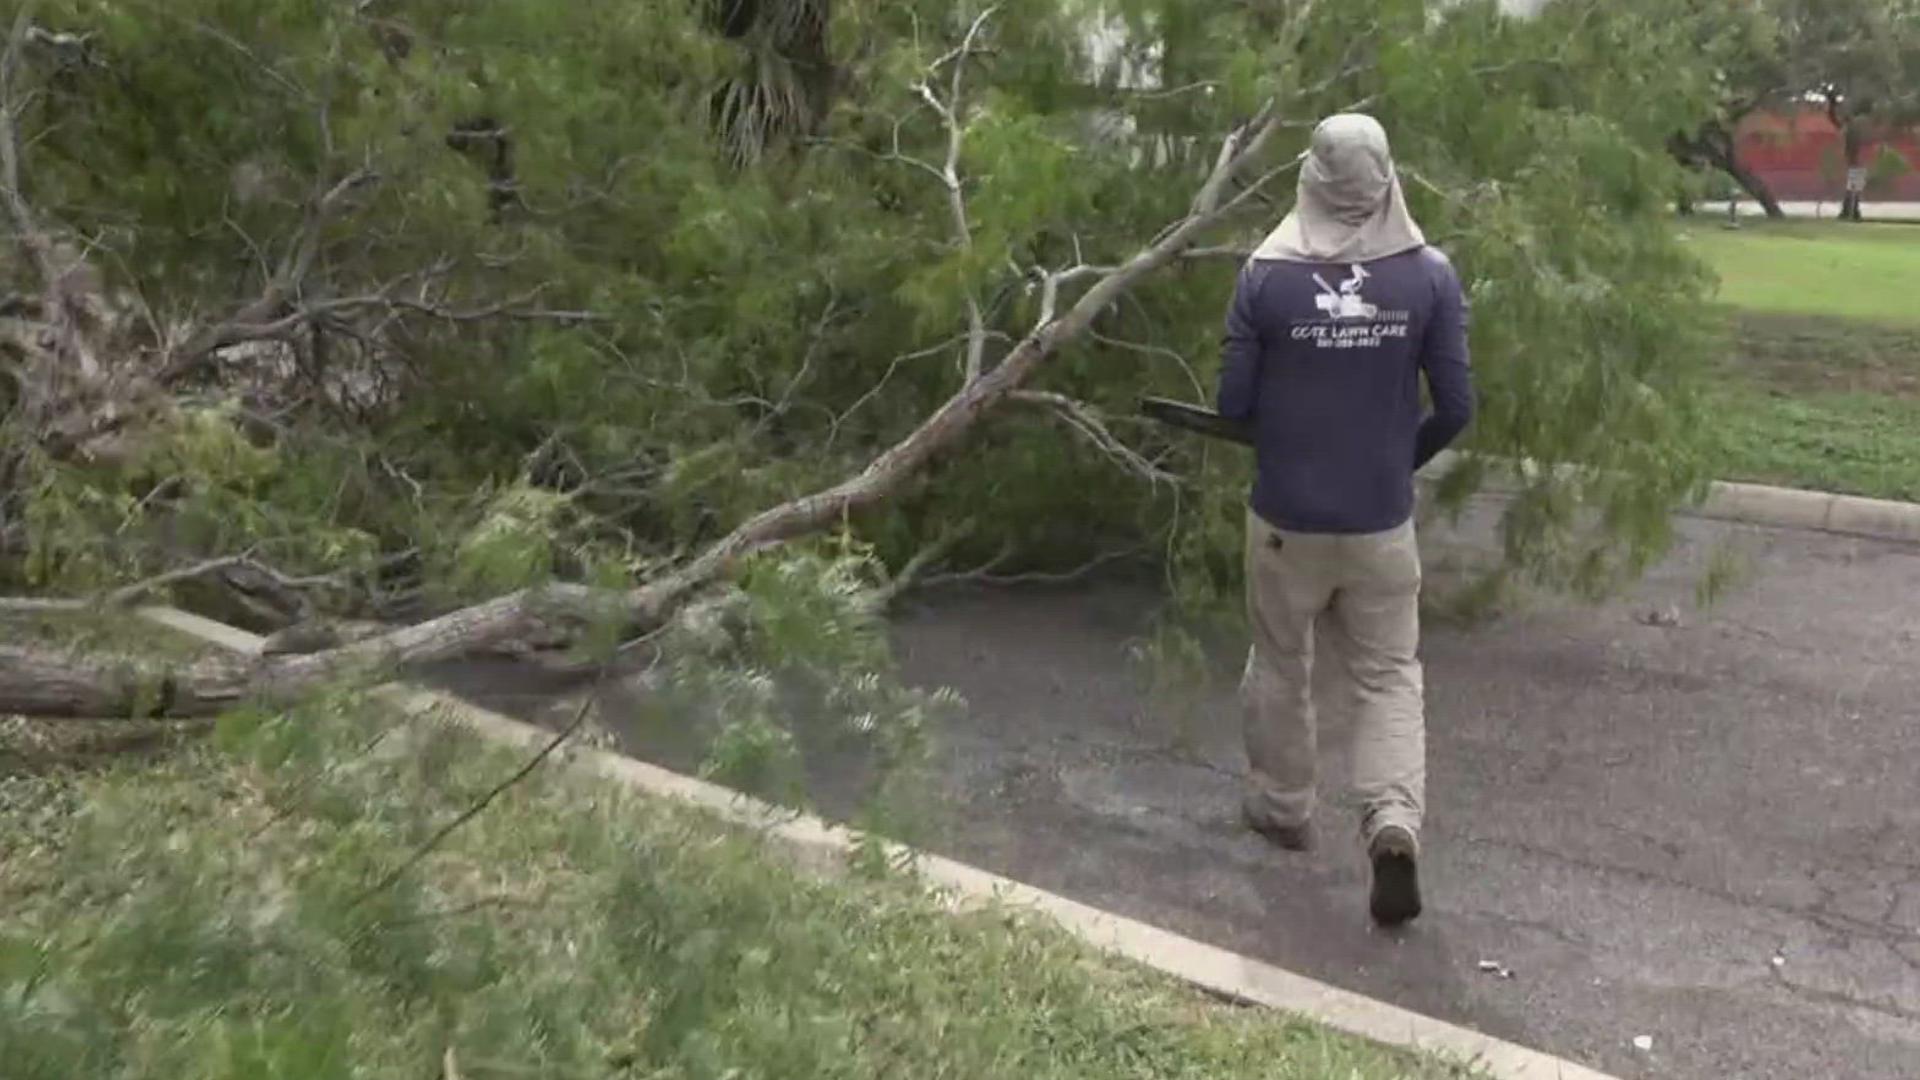 Local lawn service officials say this storm should serve as a reminder to tidy up your trees for hurricane season which officially starts June 1.